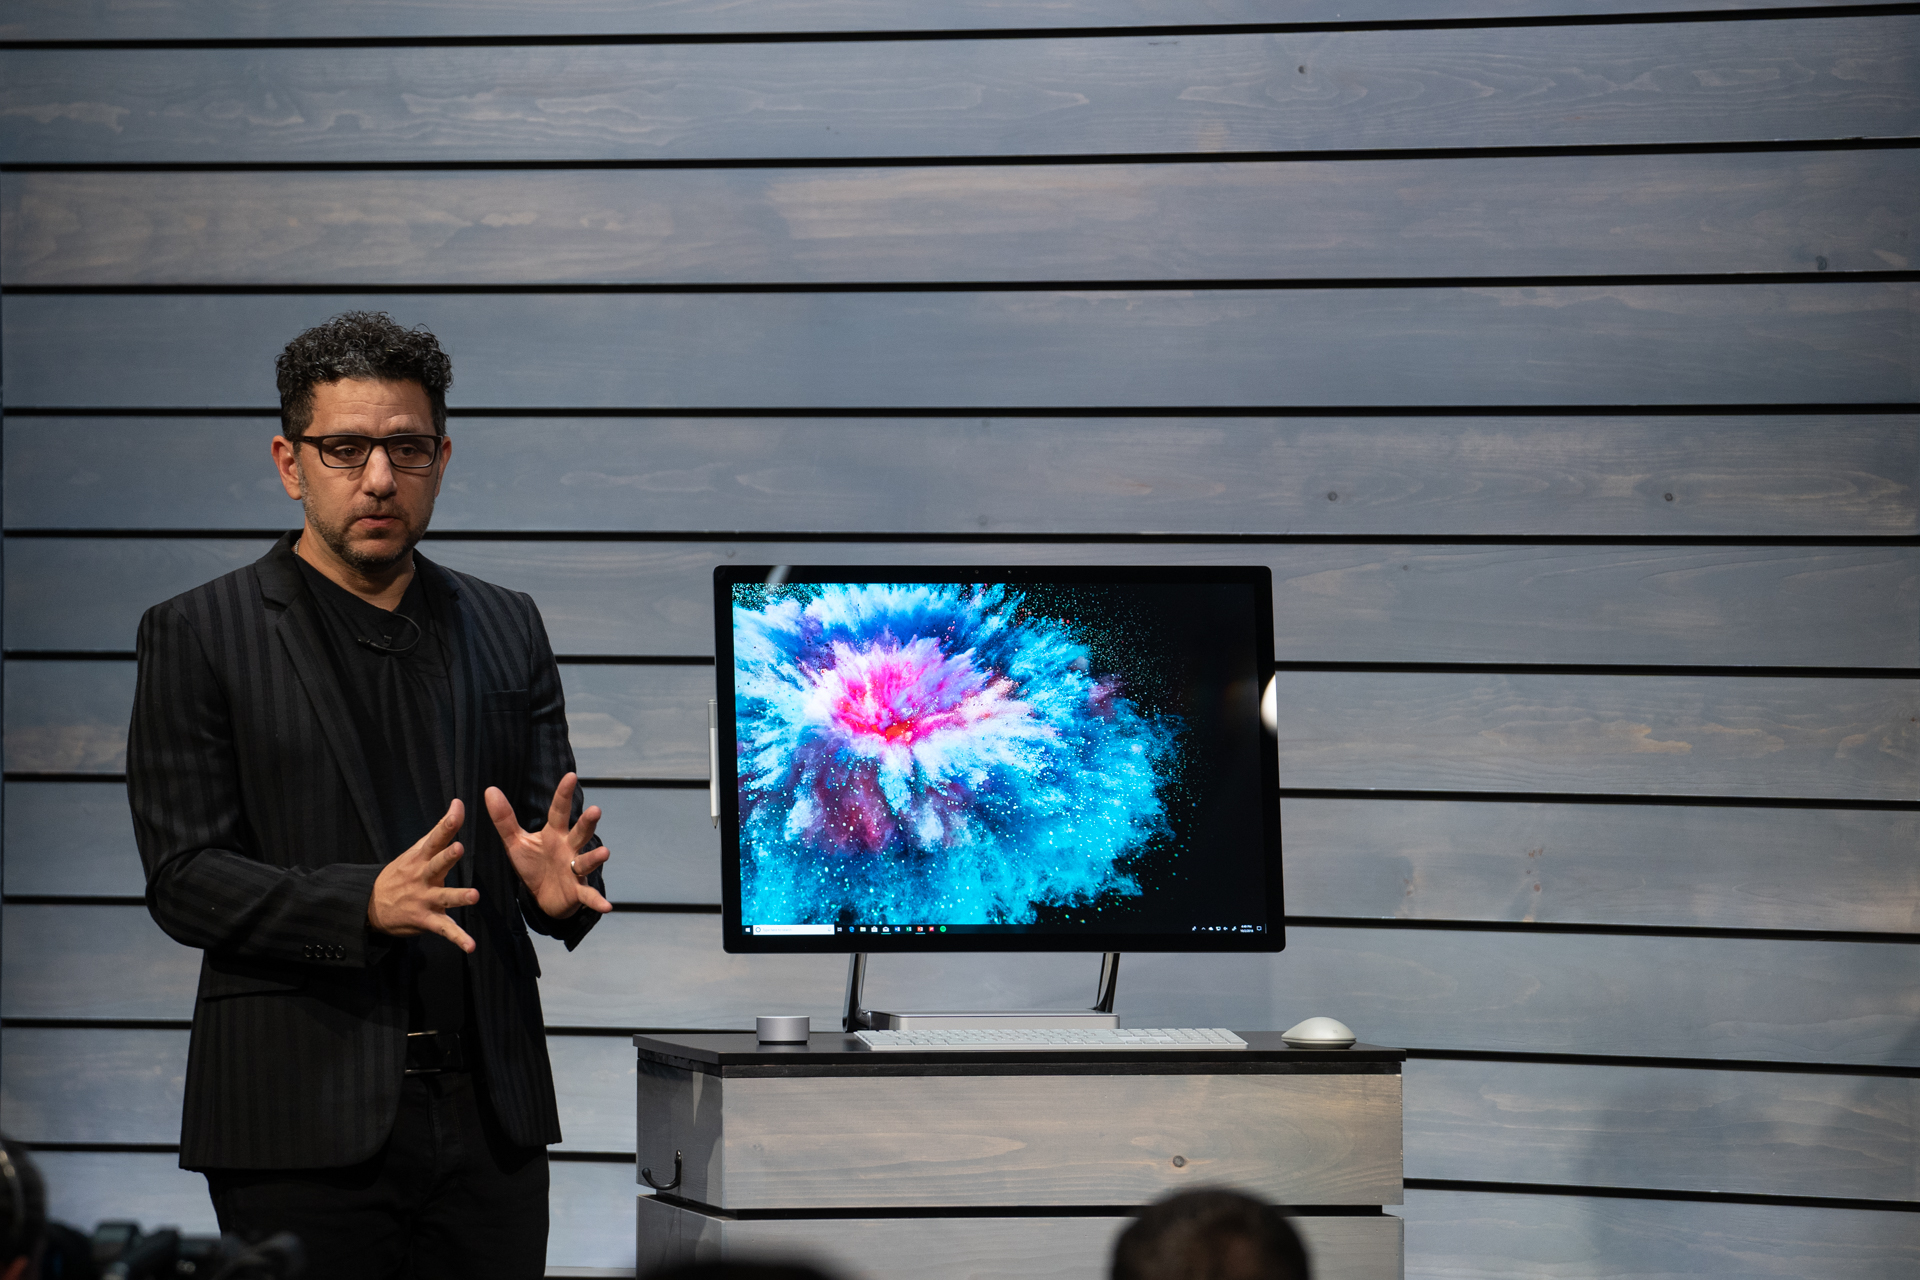 Microsoft Chief Product Officer Panos Panay revealing the Surface Studio 2 PC. (Microsoft)